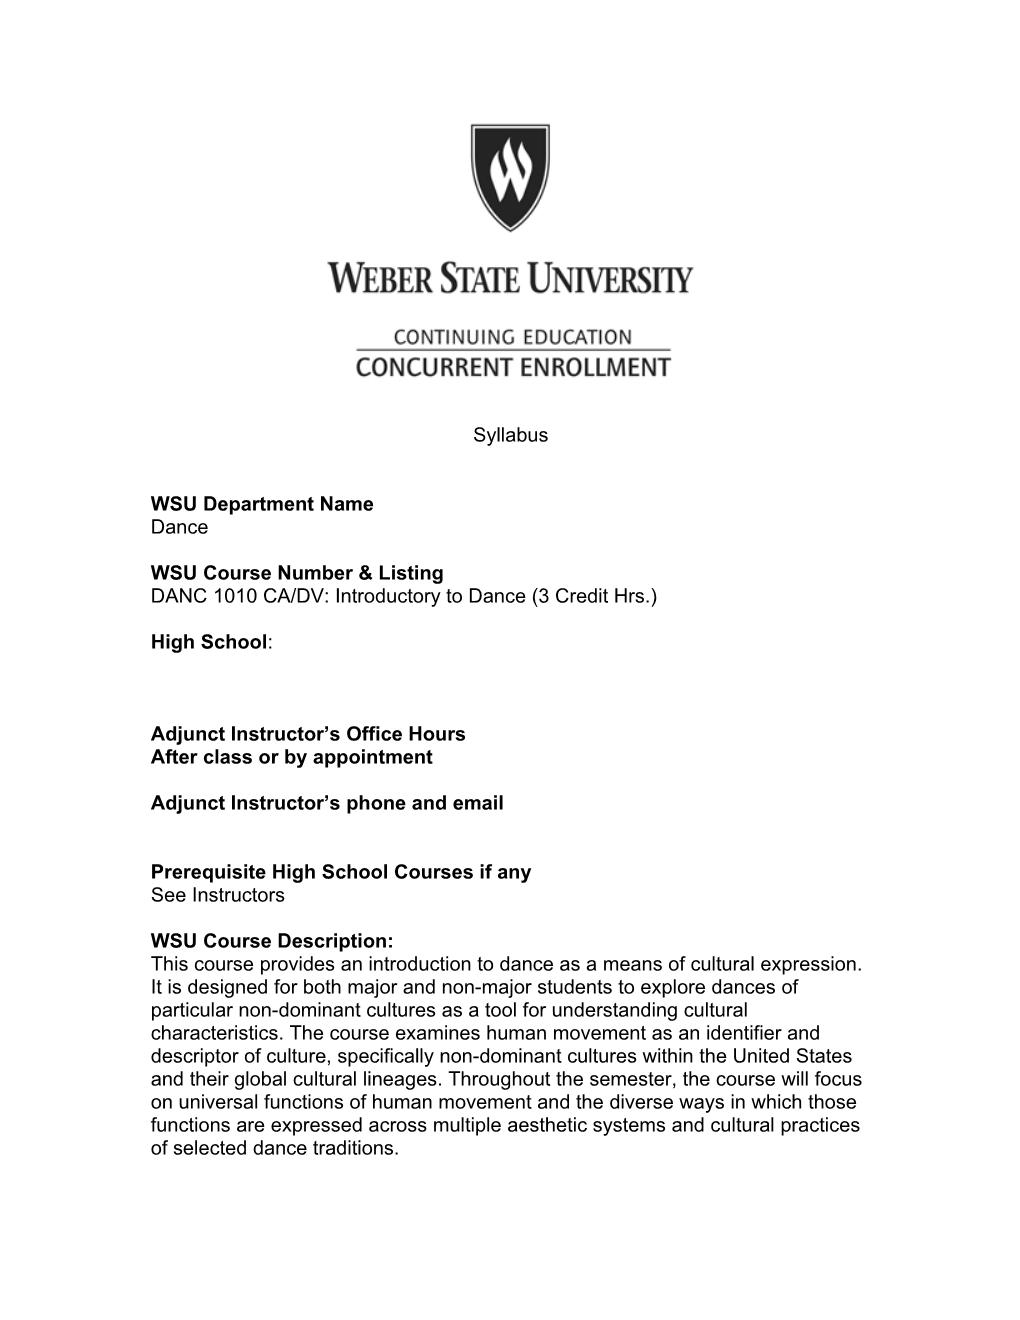 WSU Course Number & Listing